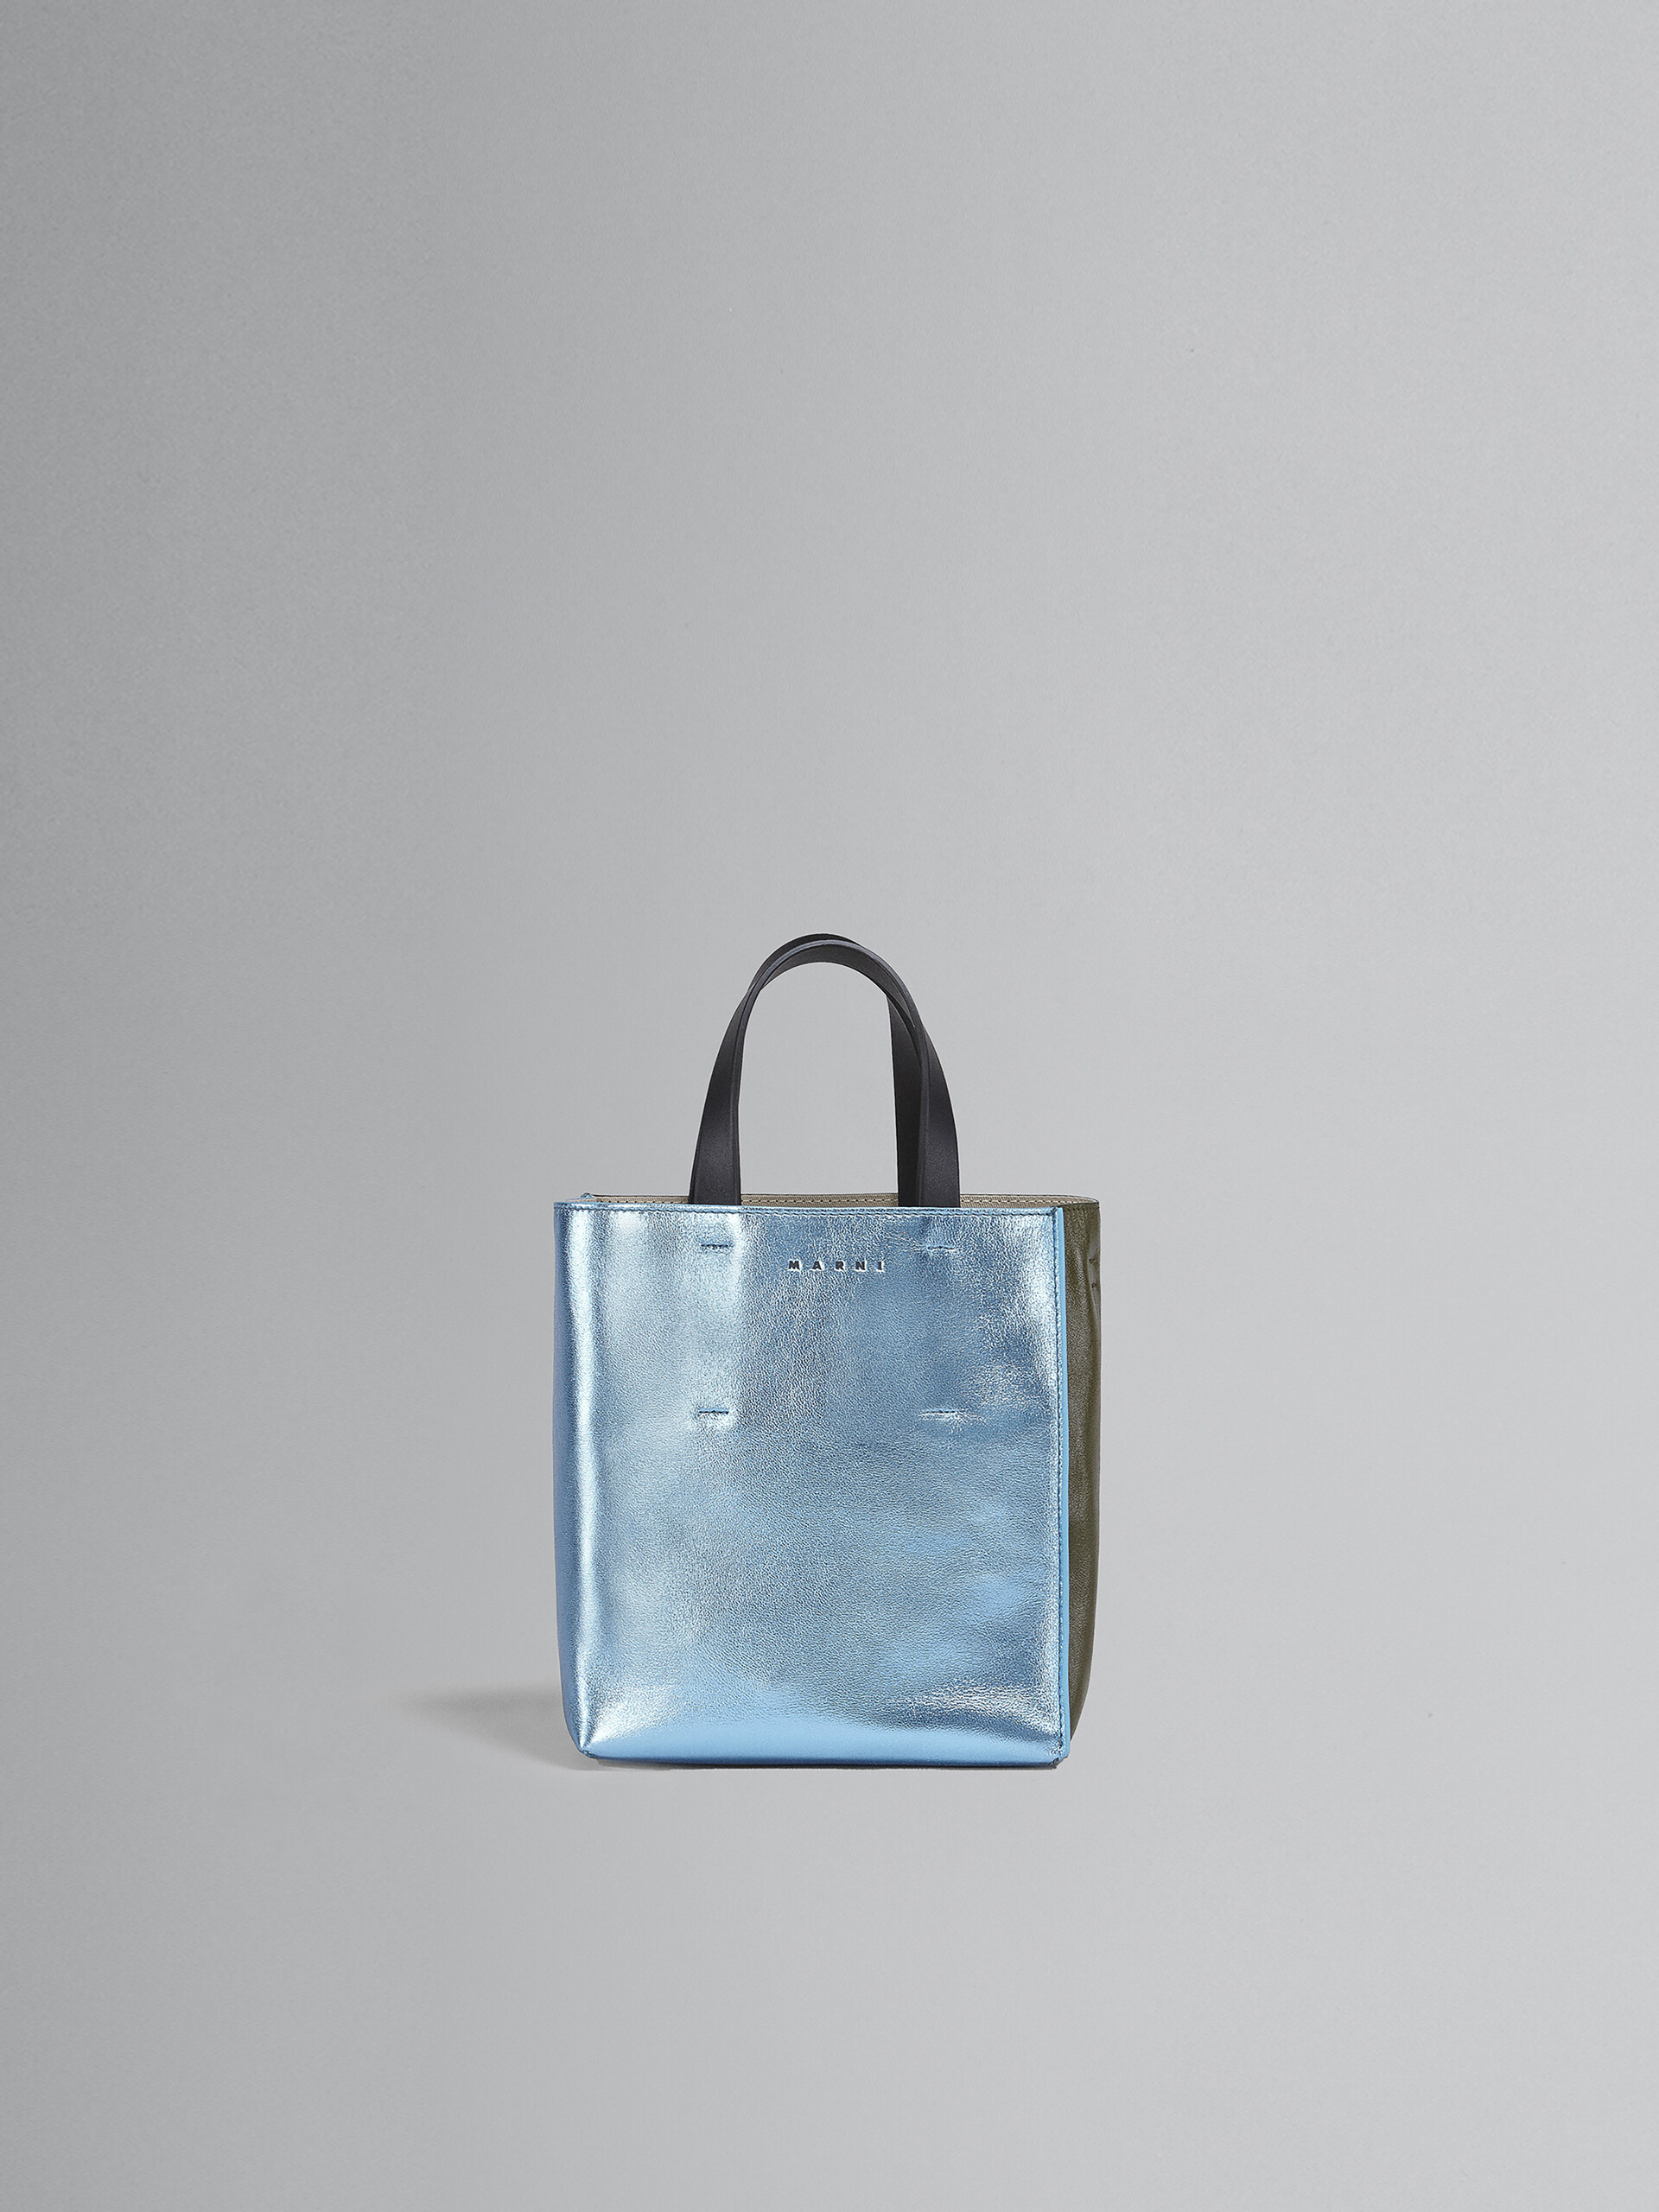 MUSEO mini bag in pale blue and green metallic leather